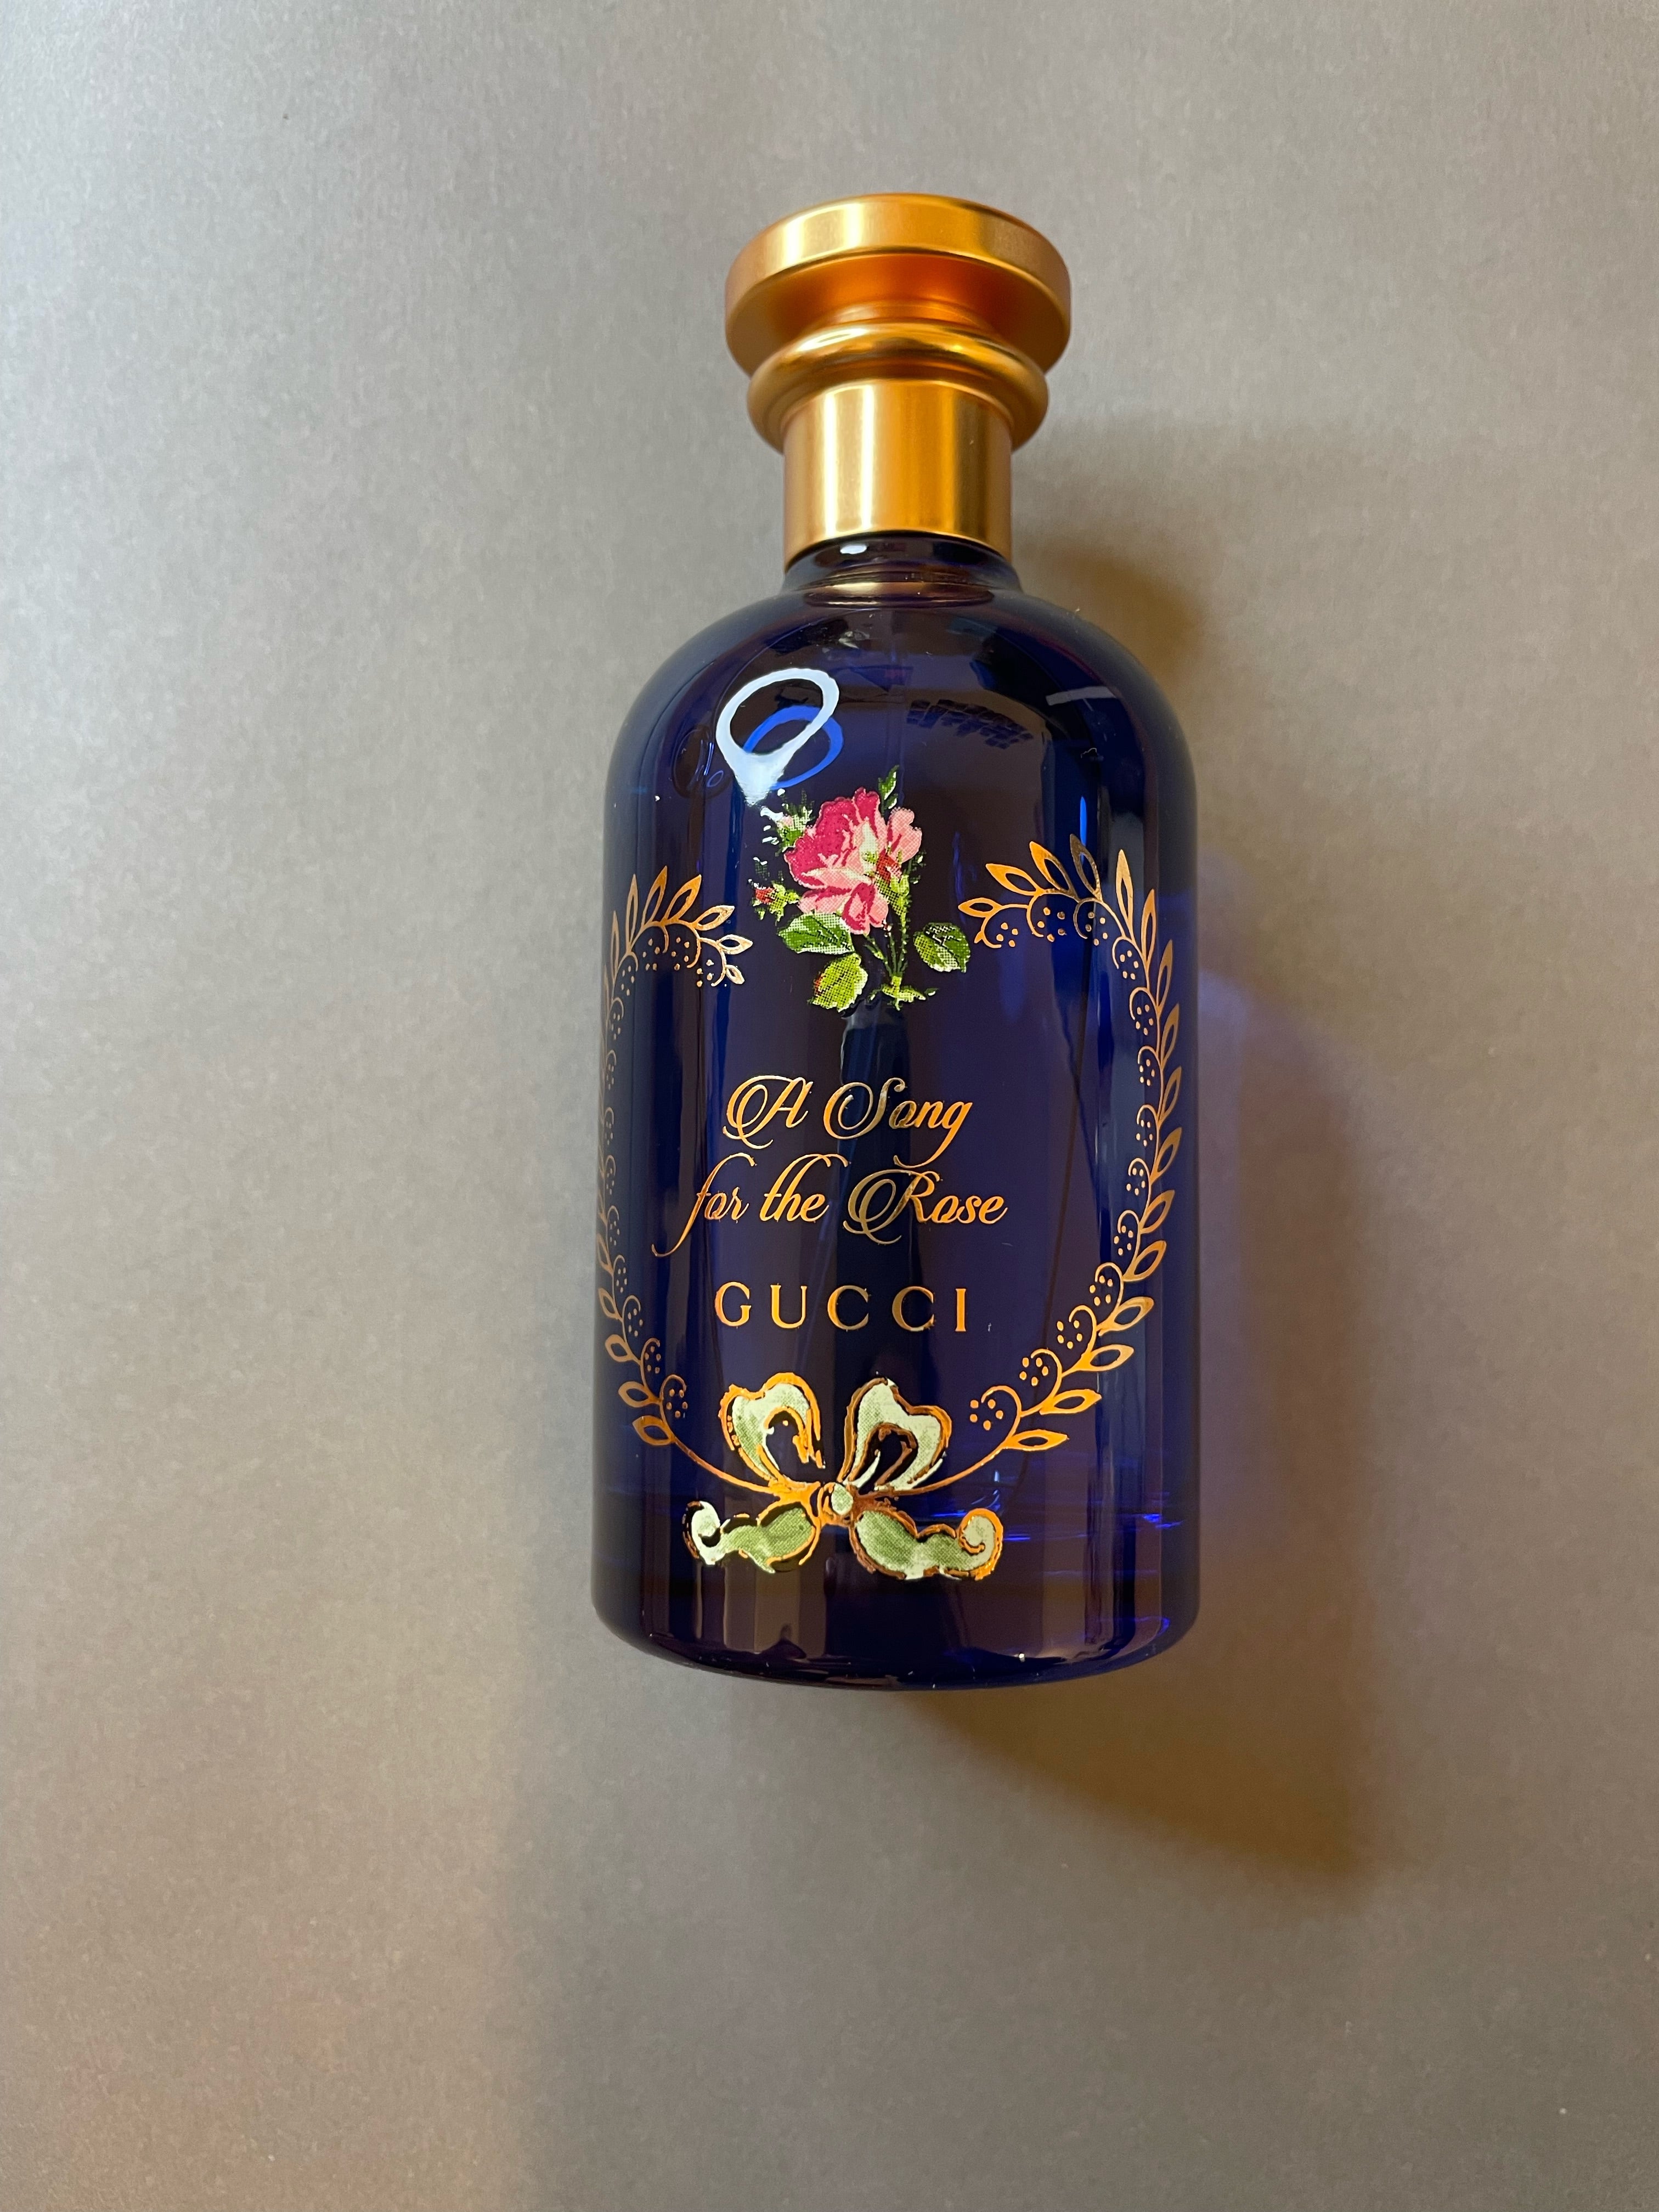 Gucci A Song For The Rose – Fragrance Samples UK